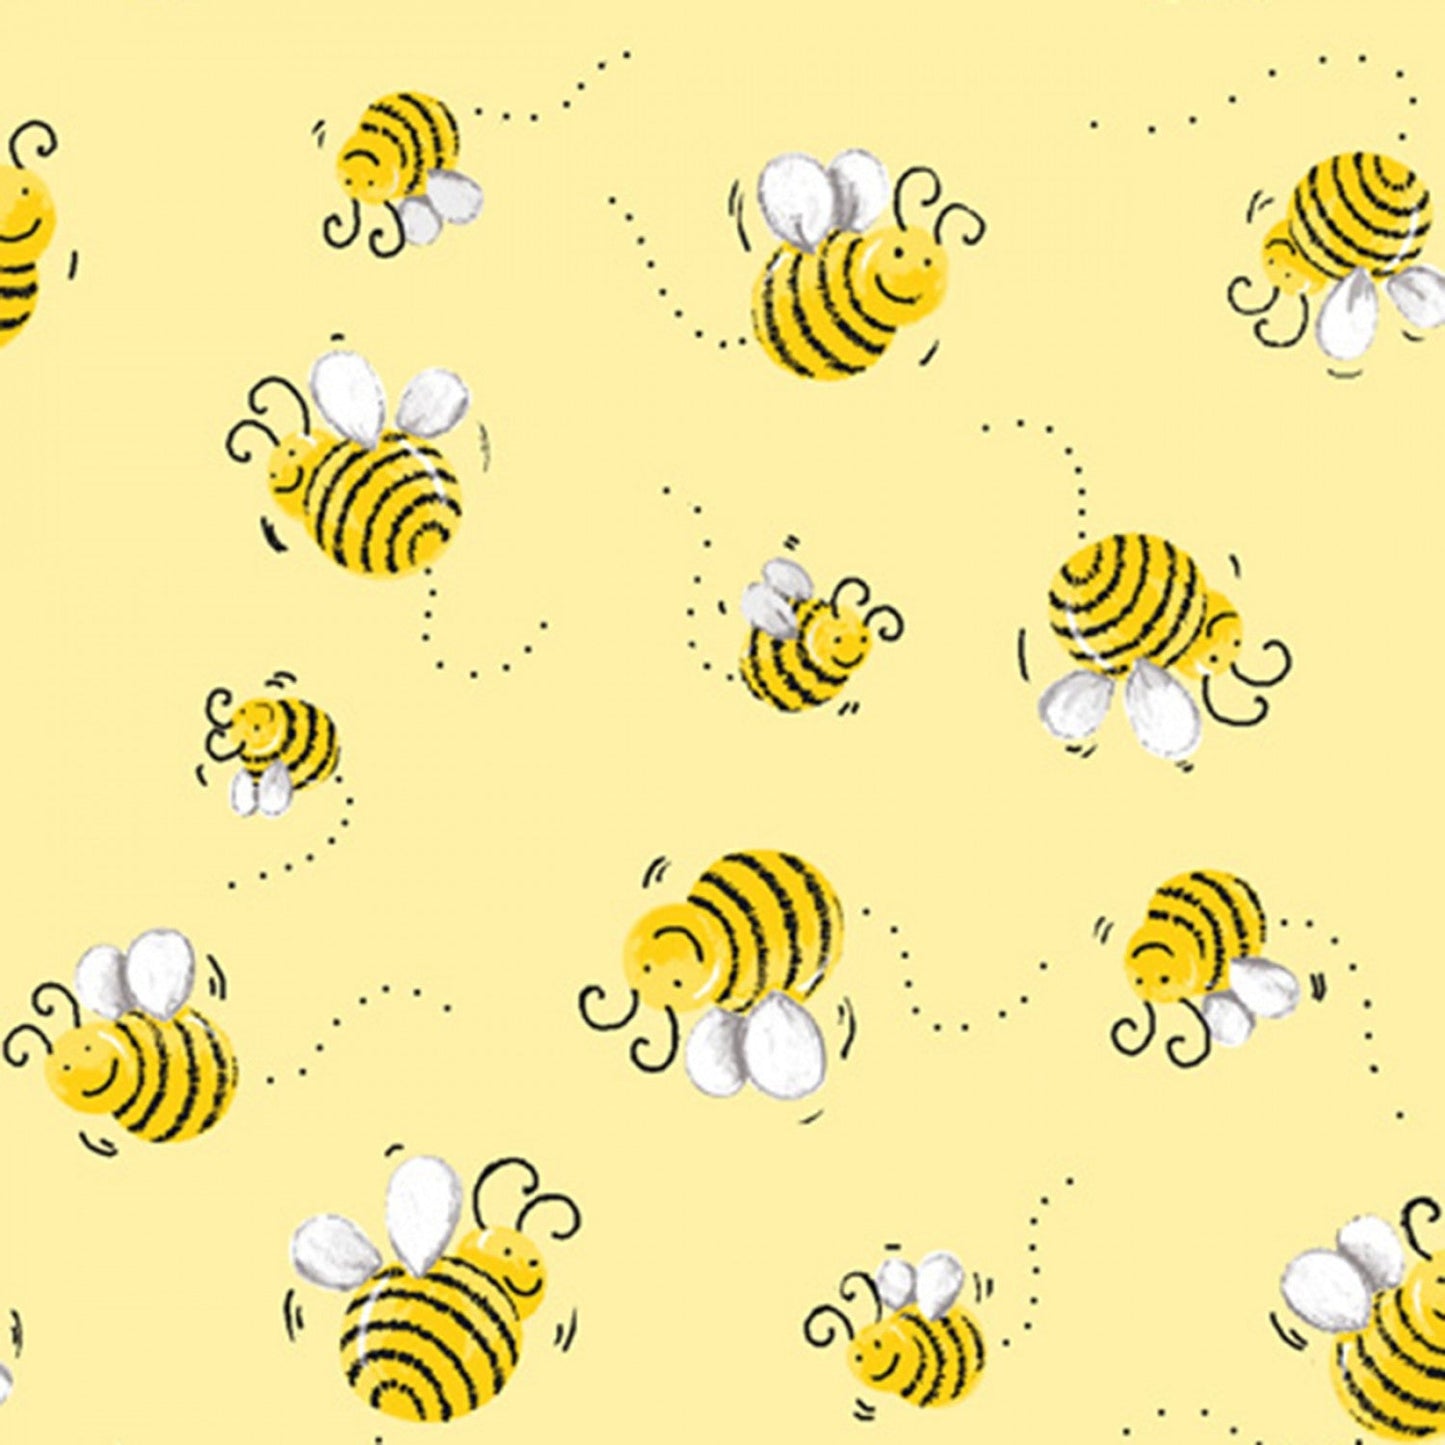 White Bees Allover Cotton Fabric - Susybee Sweet Bees Collection - SB20197-100